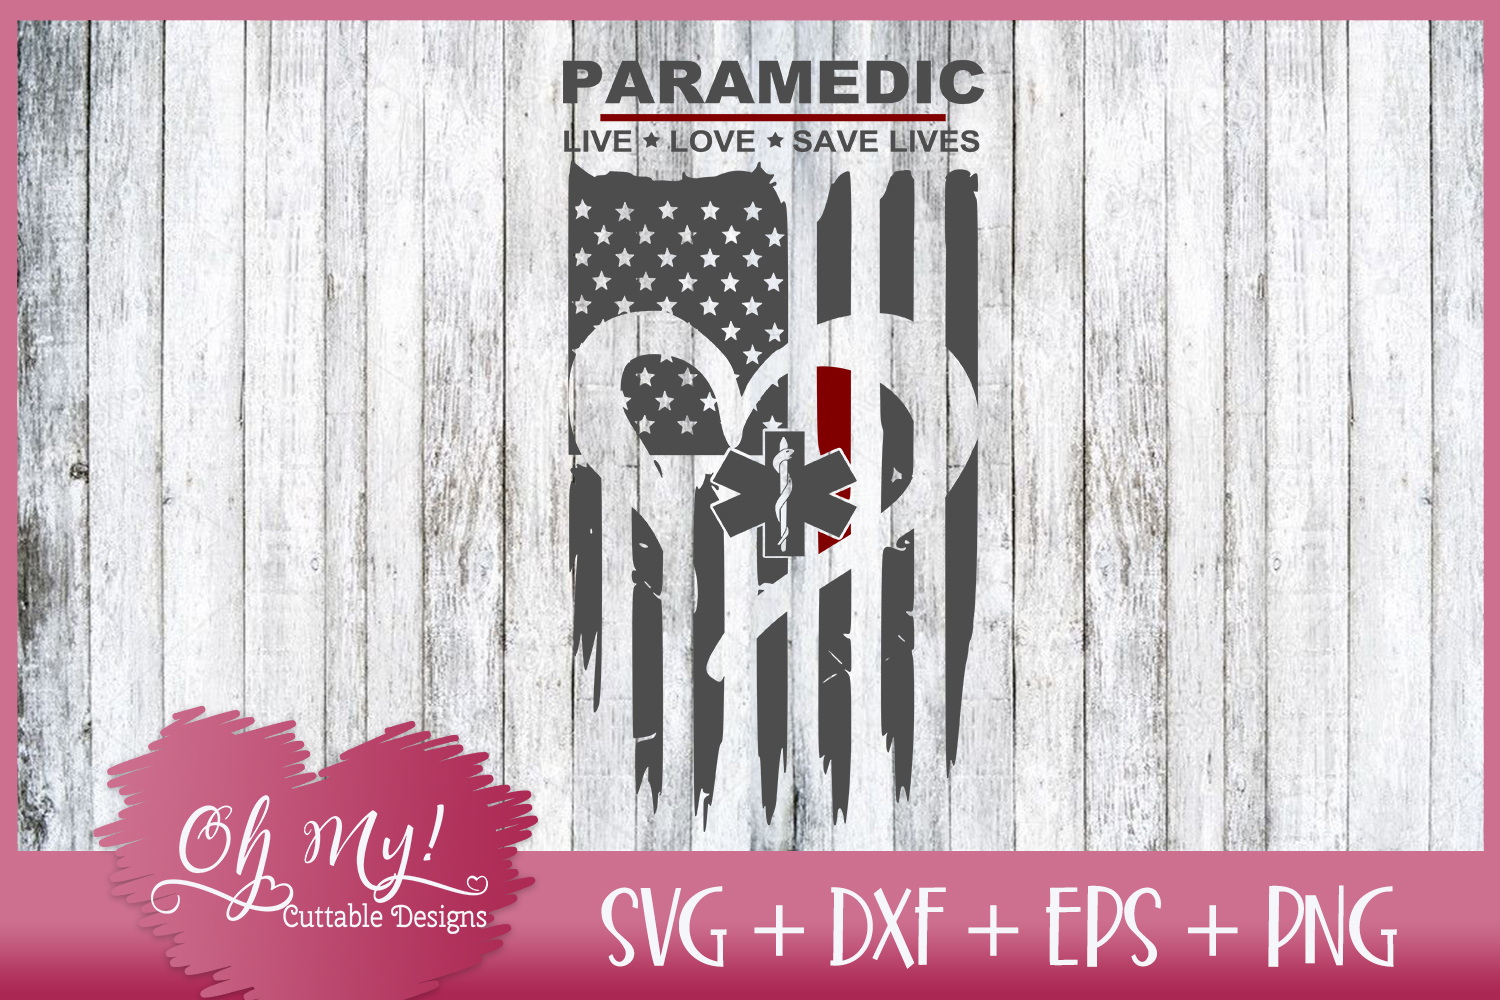 Paramedic Distressed Flag - SVG DXF EPS PNG Cutting File